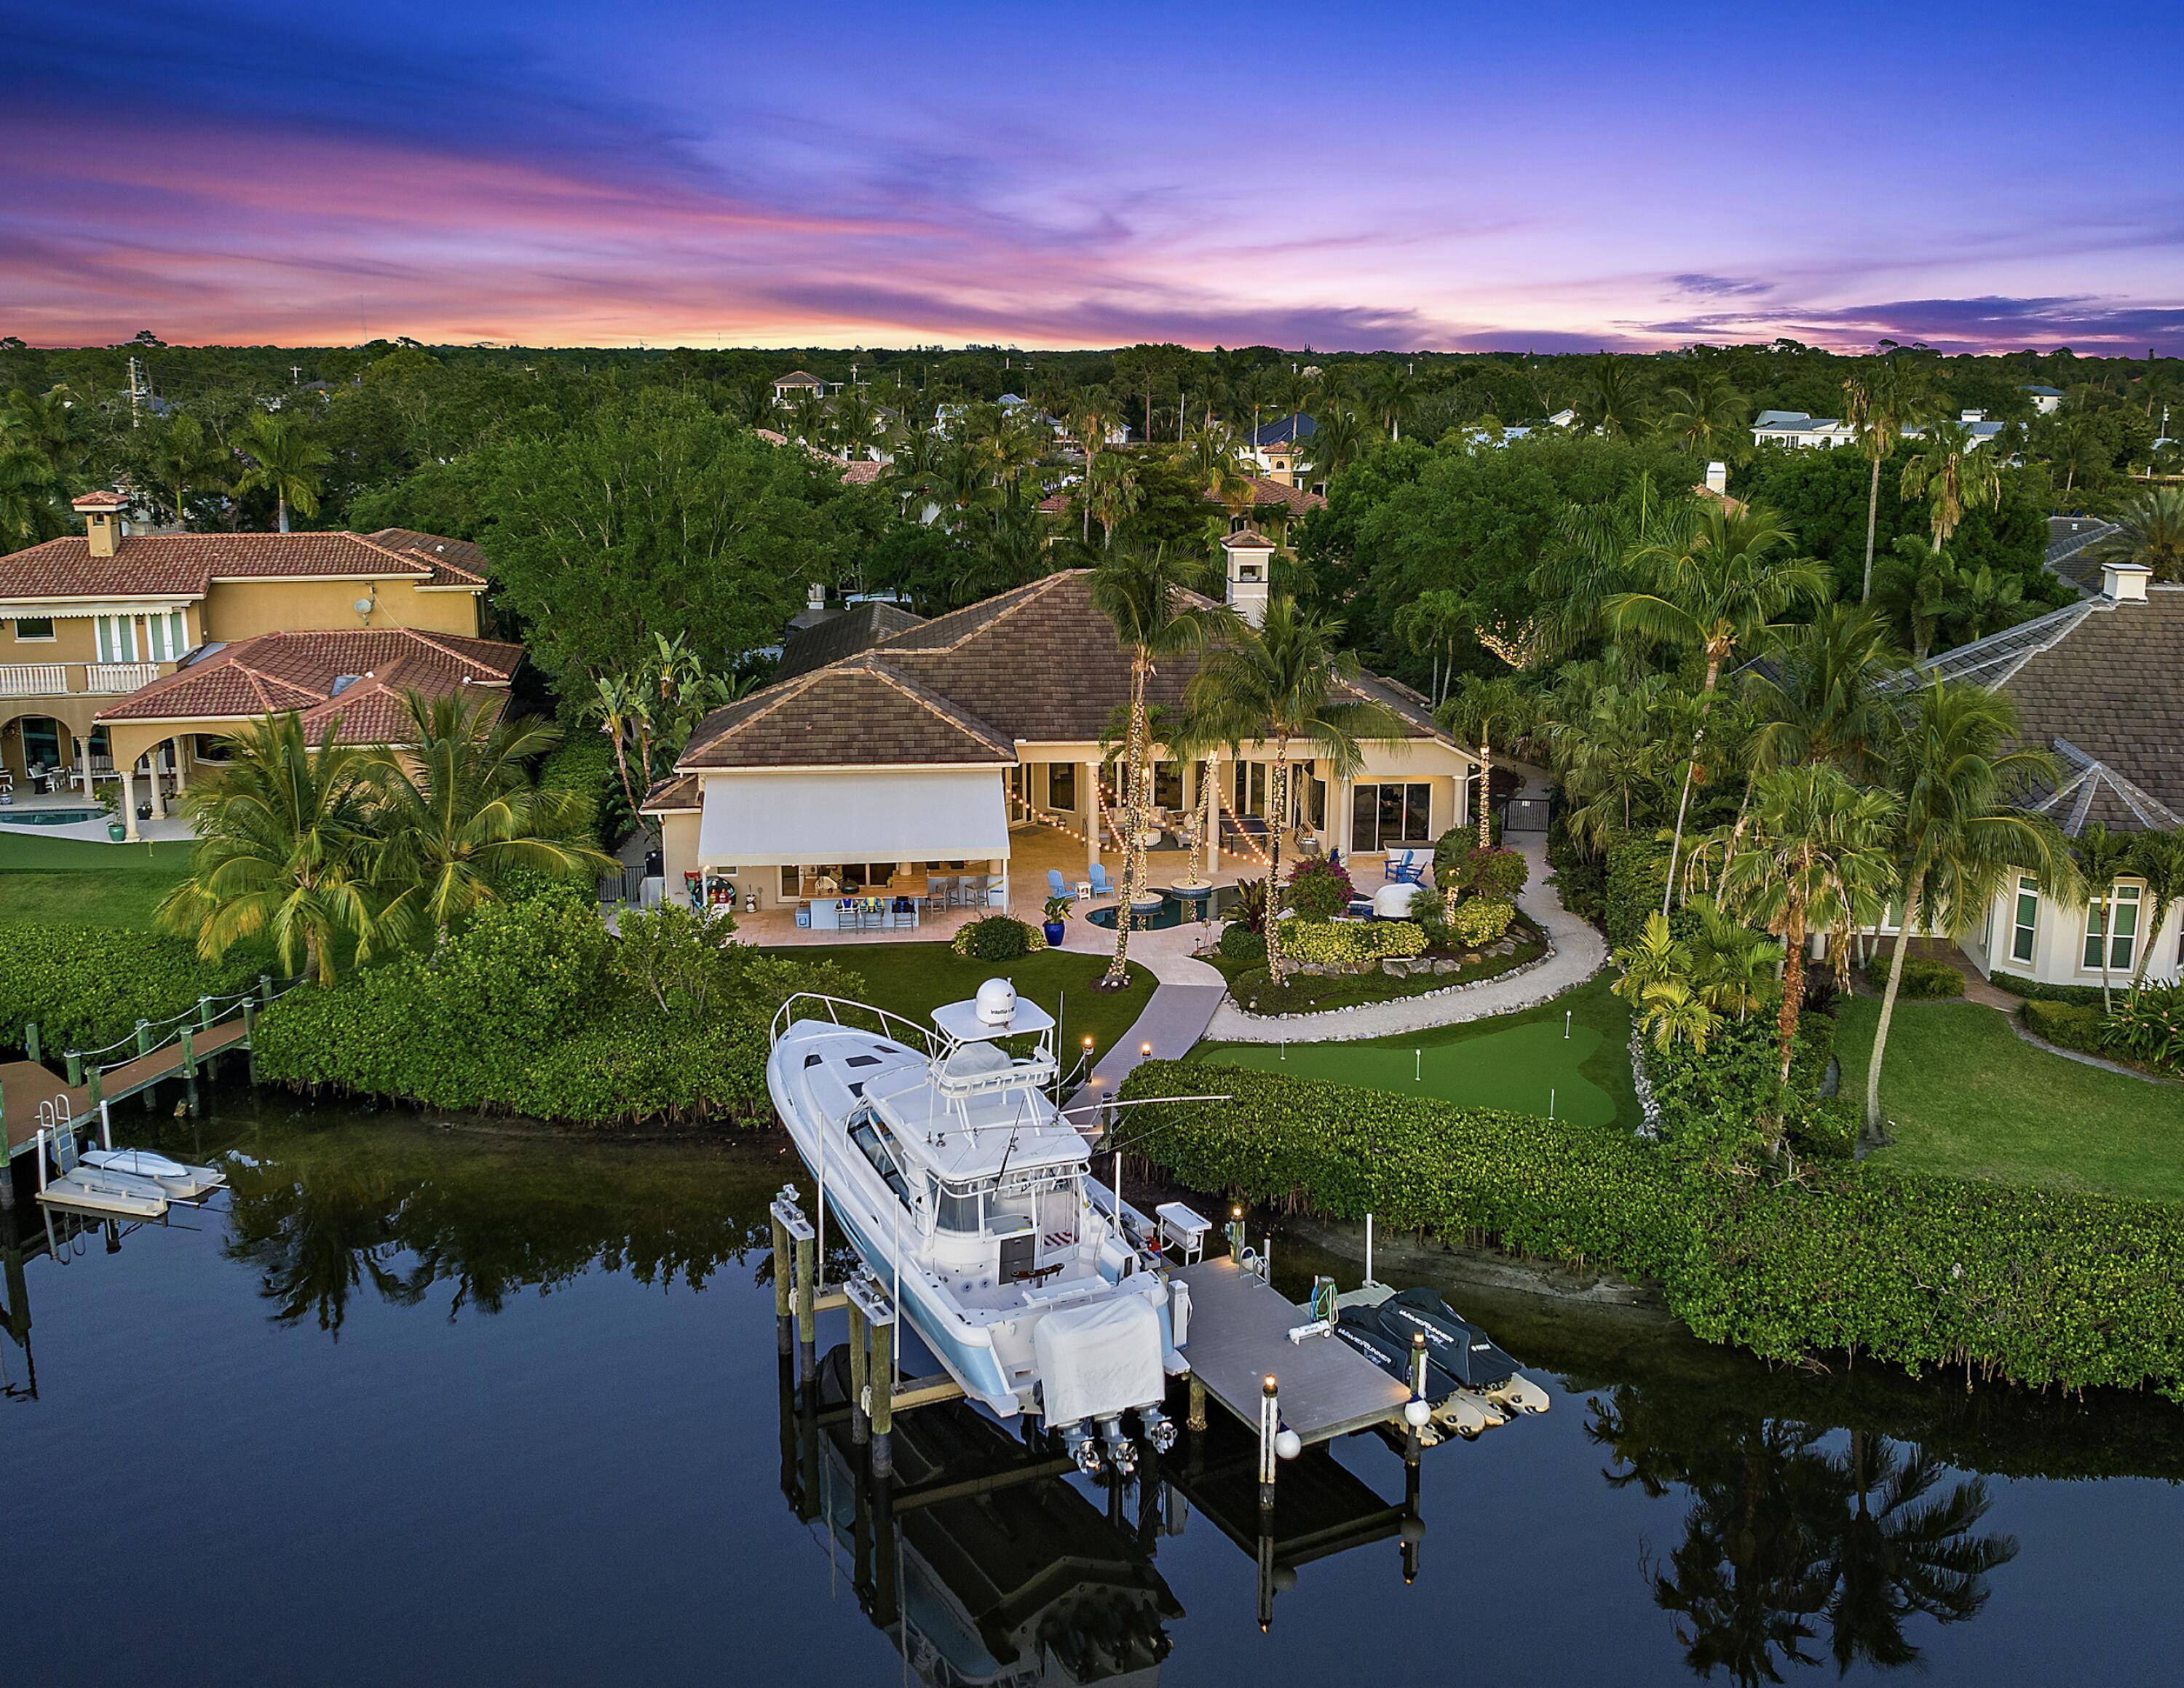 A boater's and entertainer's dream home !